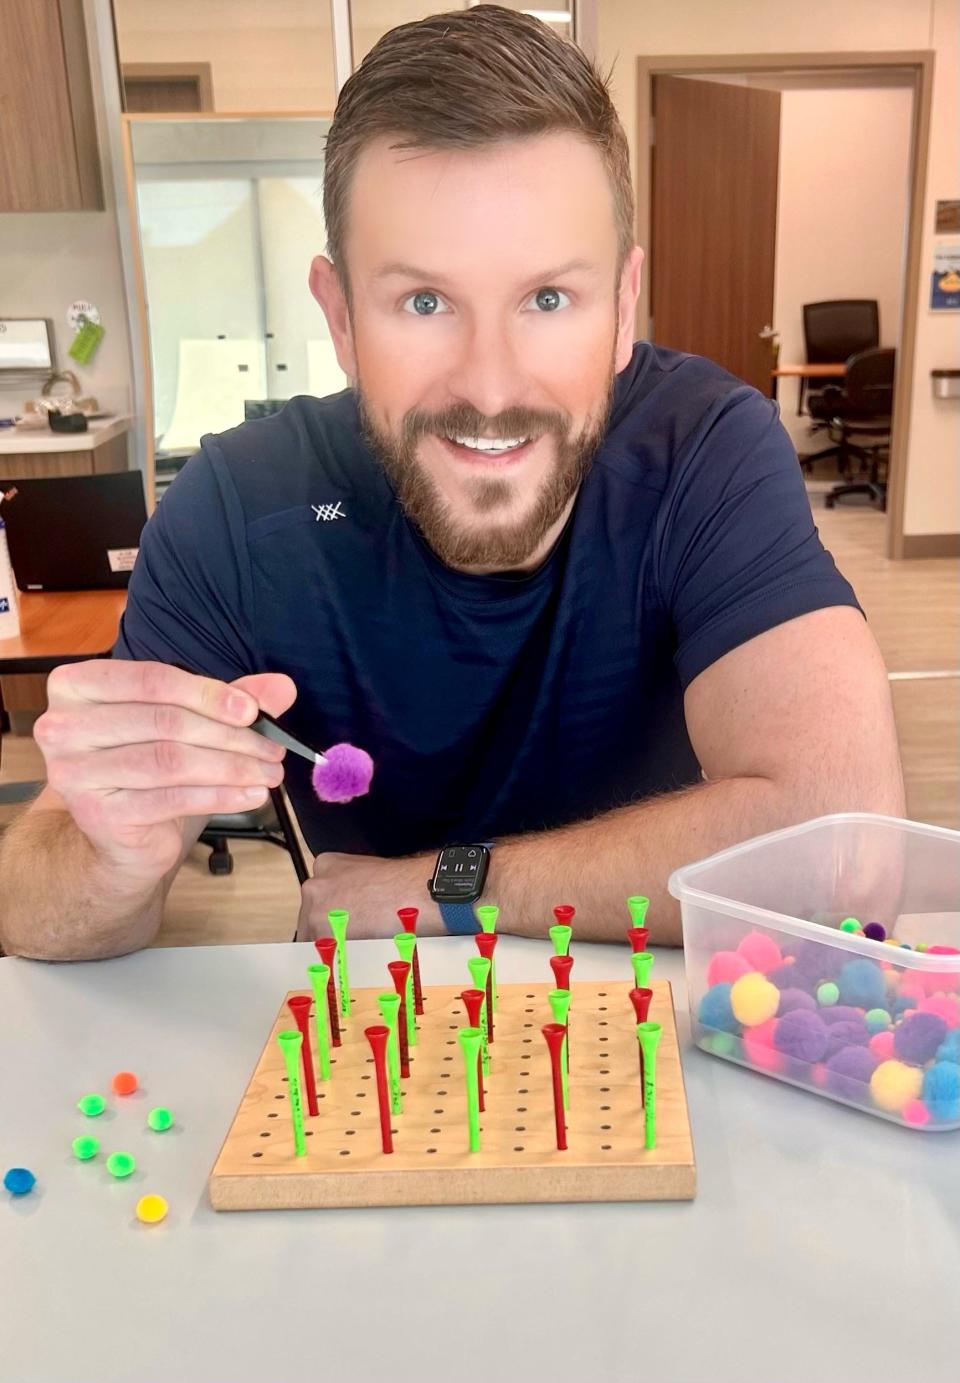 Joseph Poduslo works with a golf tee pegboard and tweezers to increase his fine motor control at a therapy session in Texas. Poduslo is recovering from a traumatic brain injury.